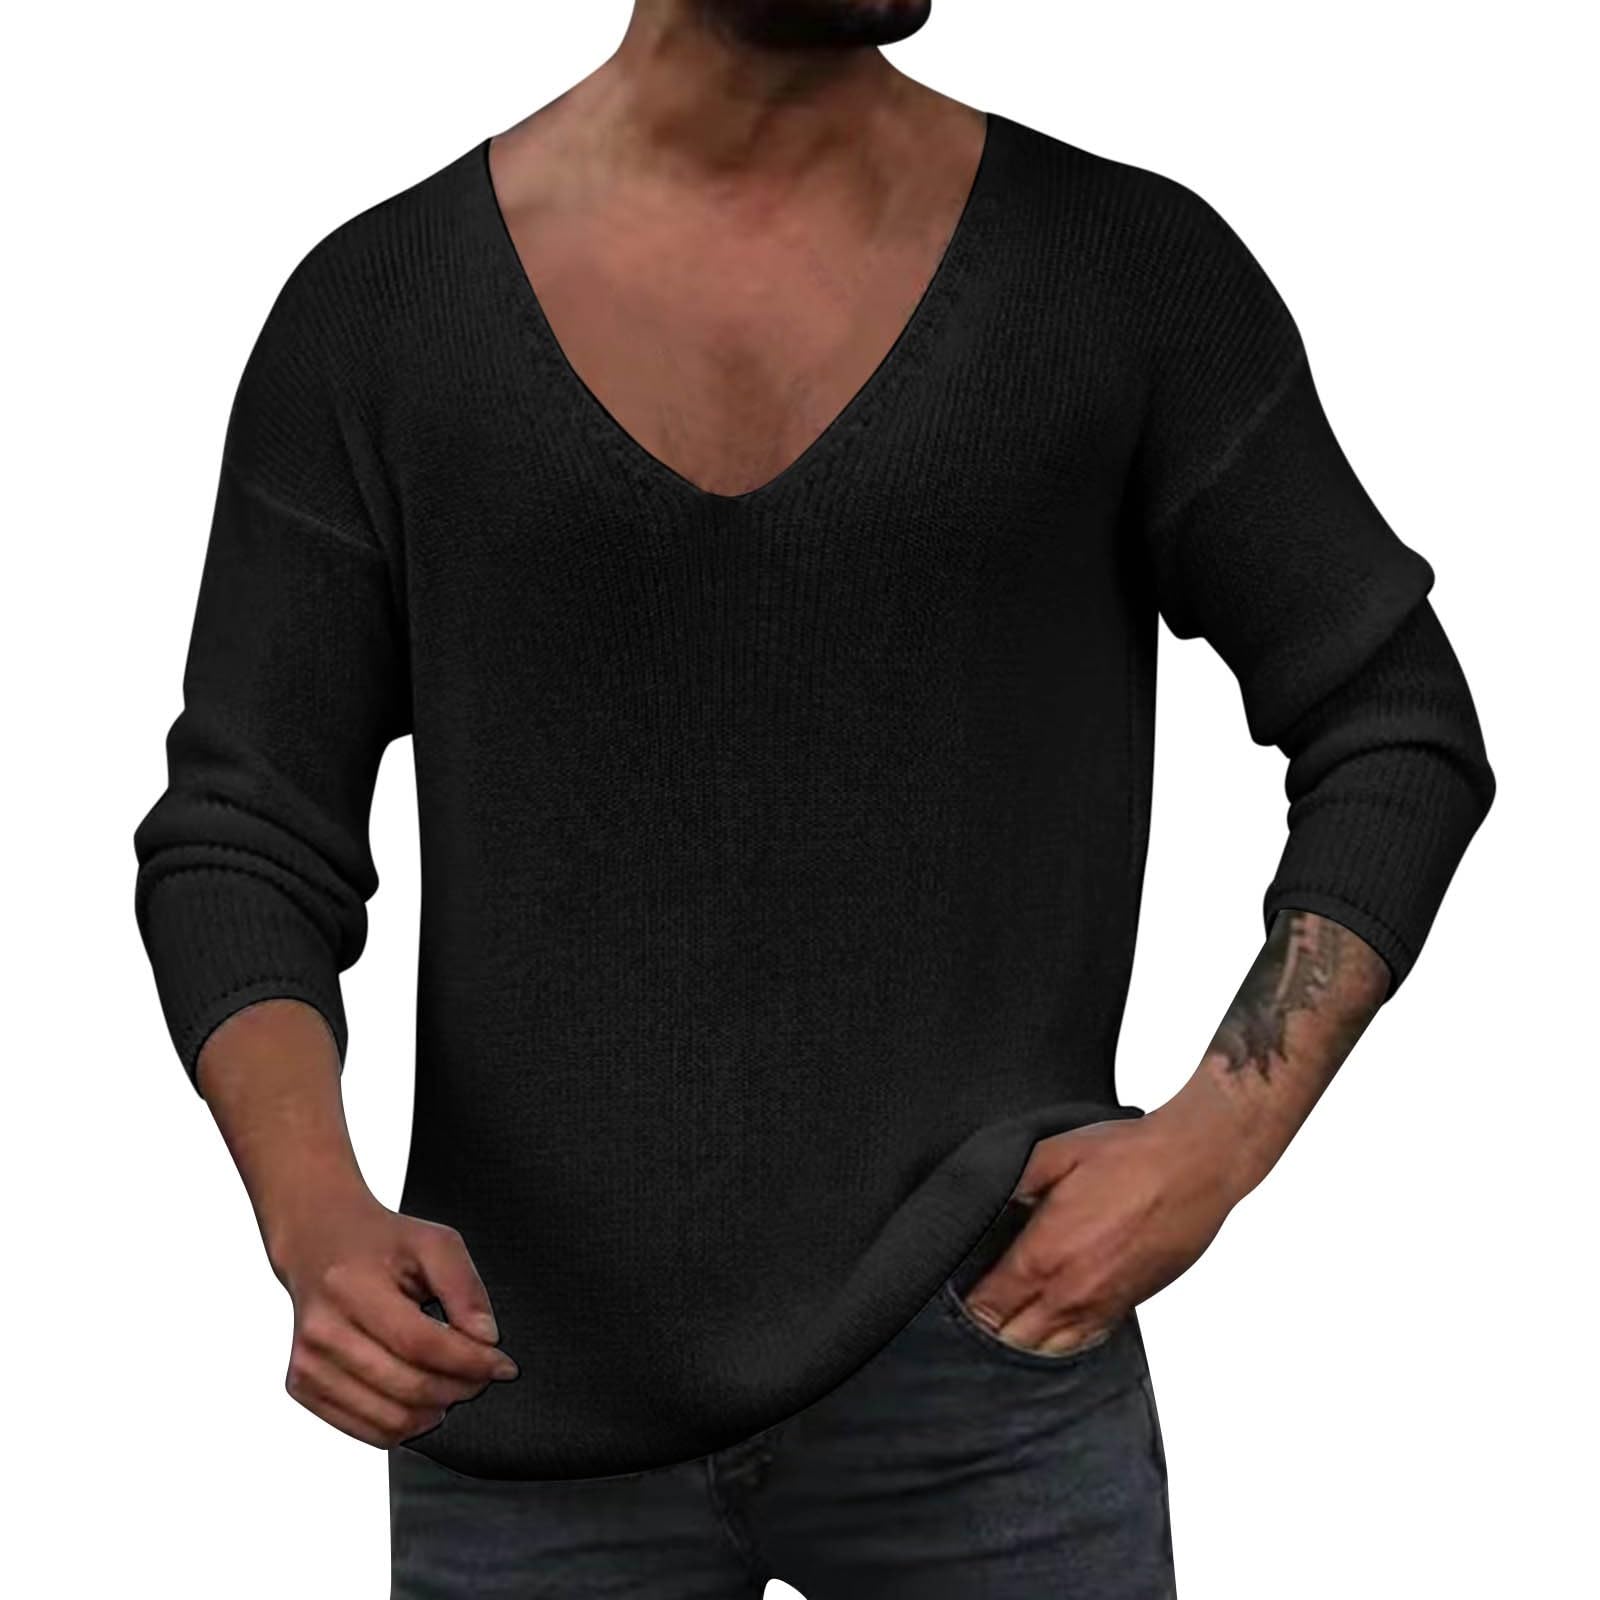 Off the shoulder sweaters have emerged as a fashionable yet functional wardrobe essential, offering a blend of casual comfort and contemporary style.